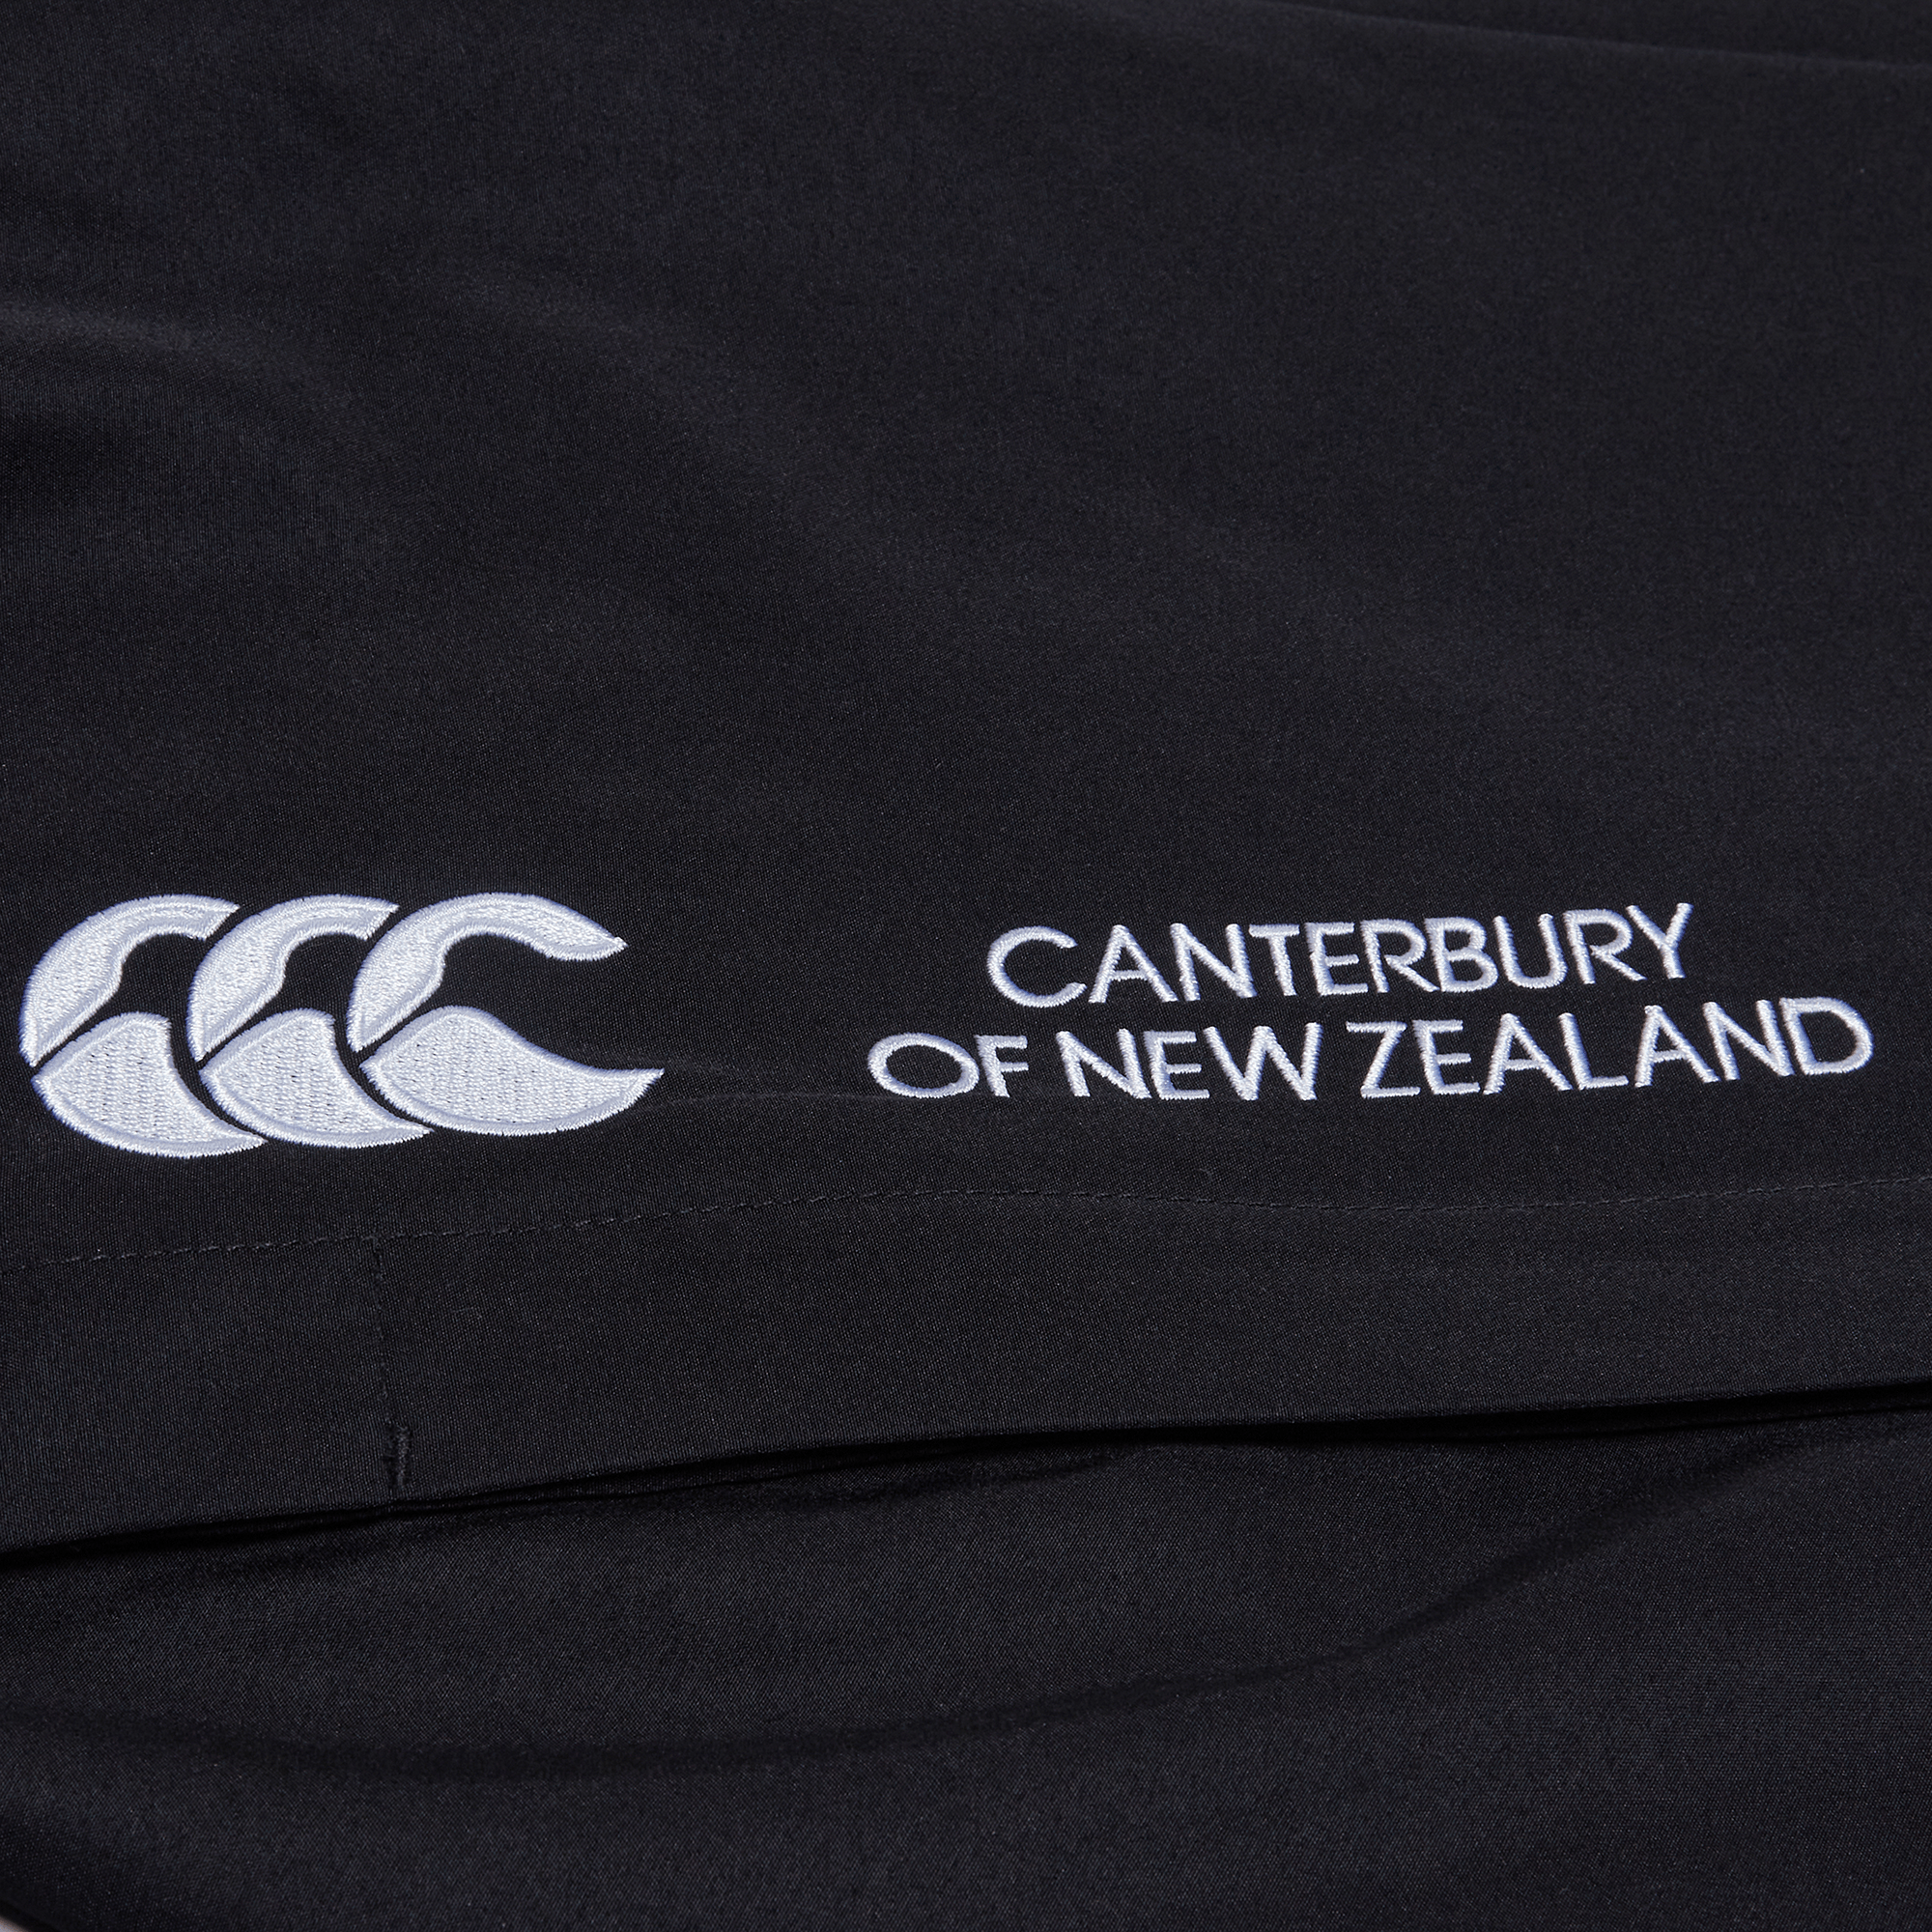 Open Hem Stadium Pant by Canterbury - Adult & Youth - Leg Zipper & Quick  Drying - Multiple Colors - World Rugby Shop